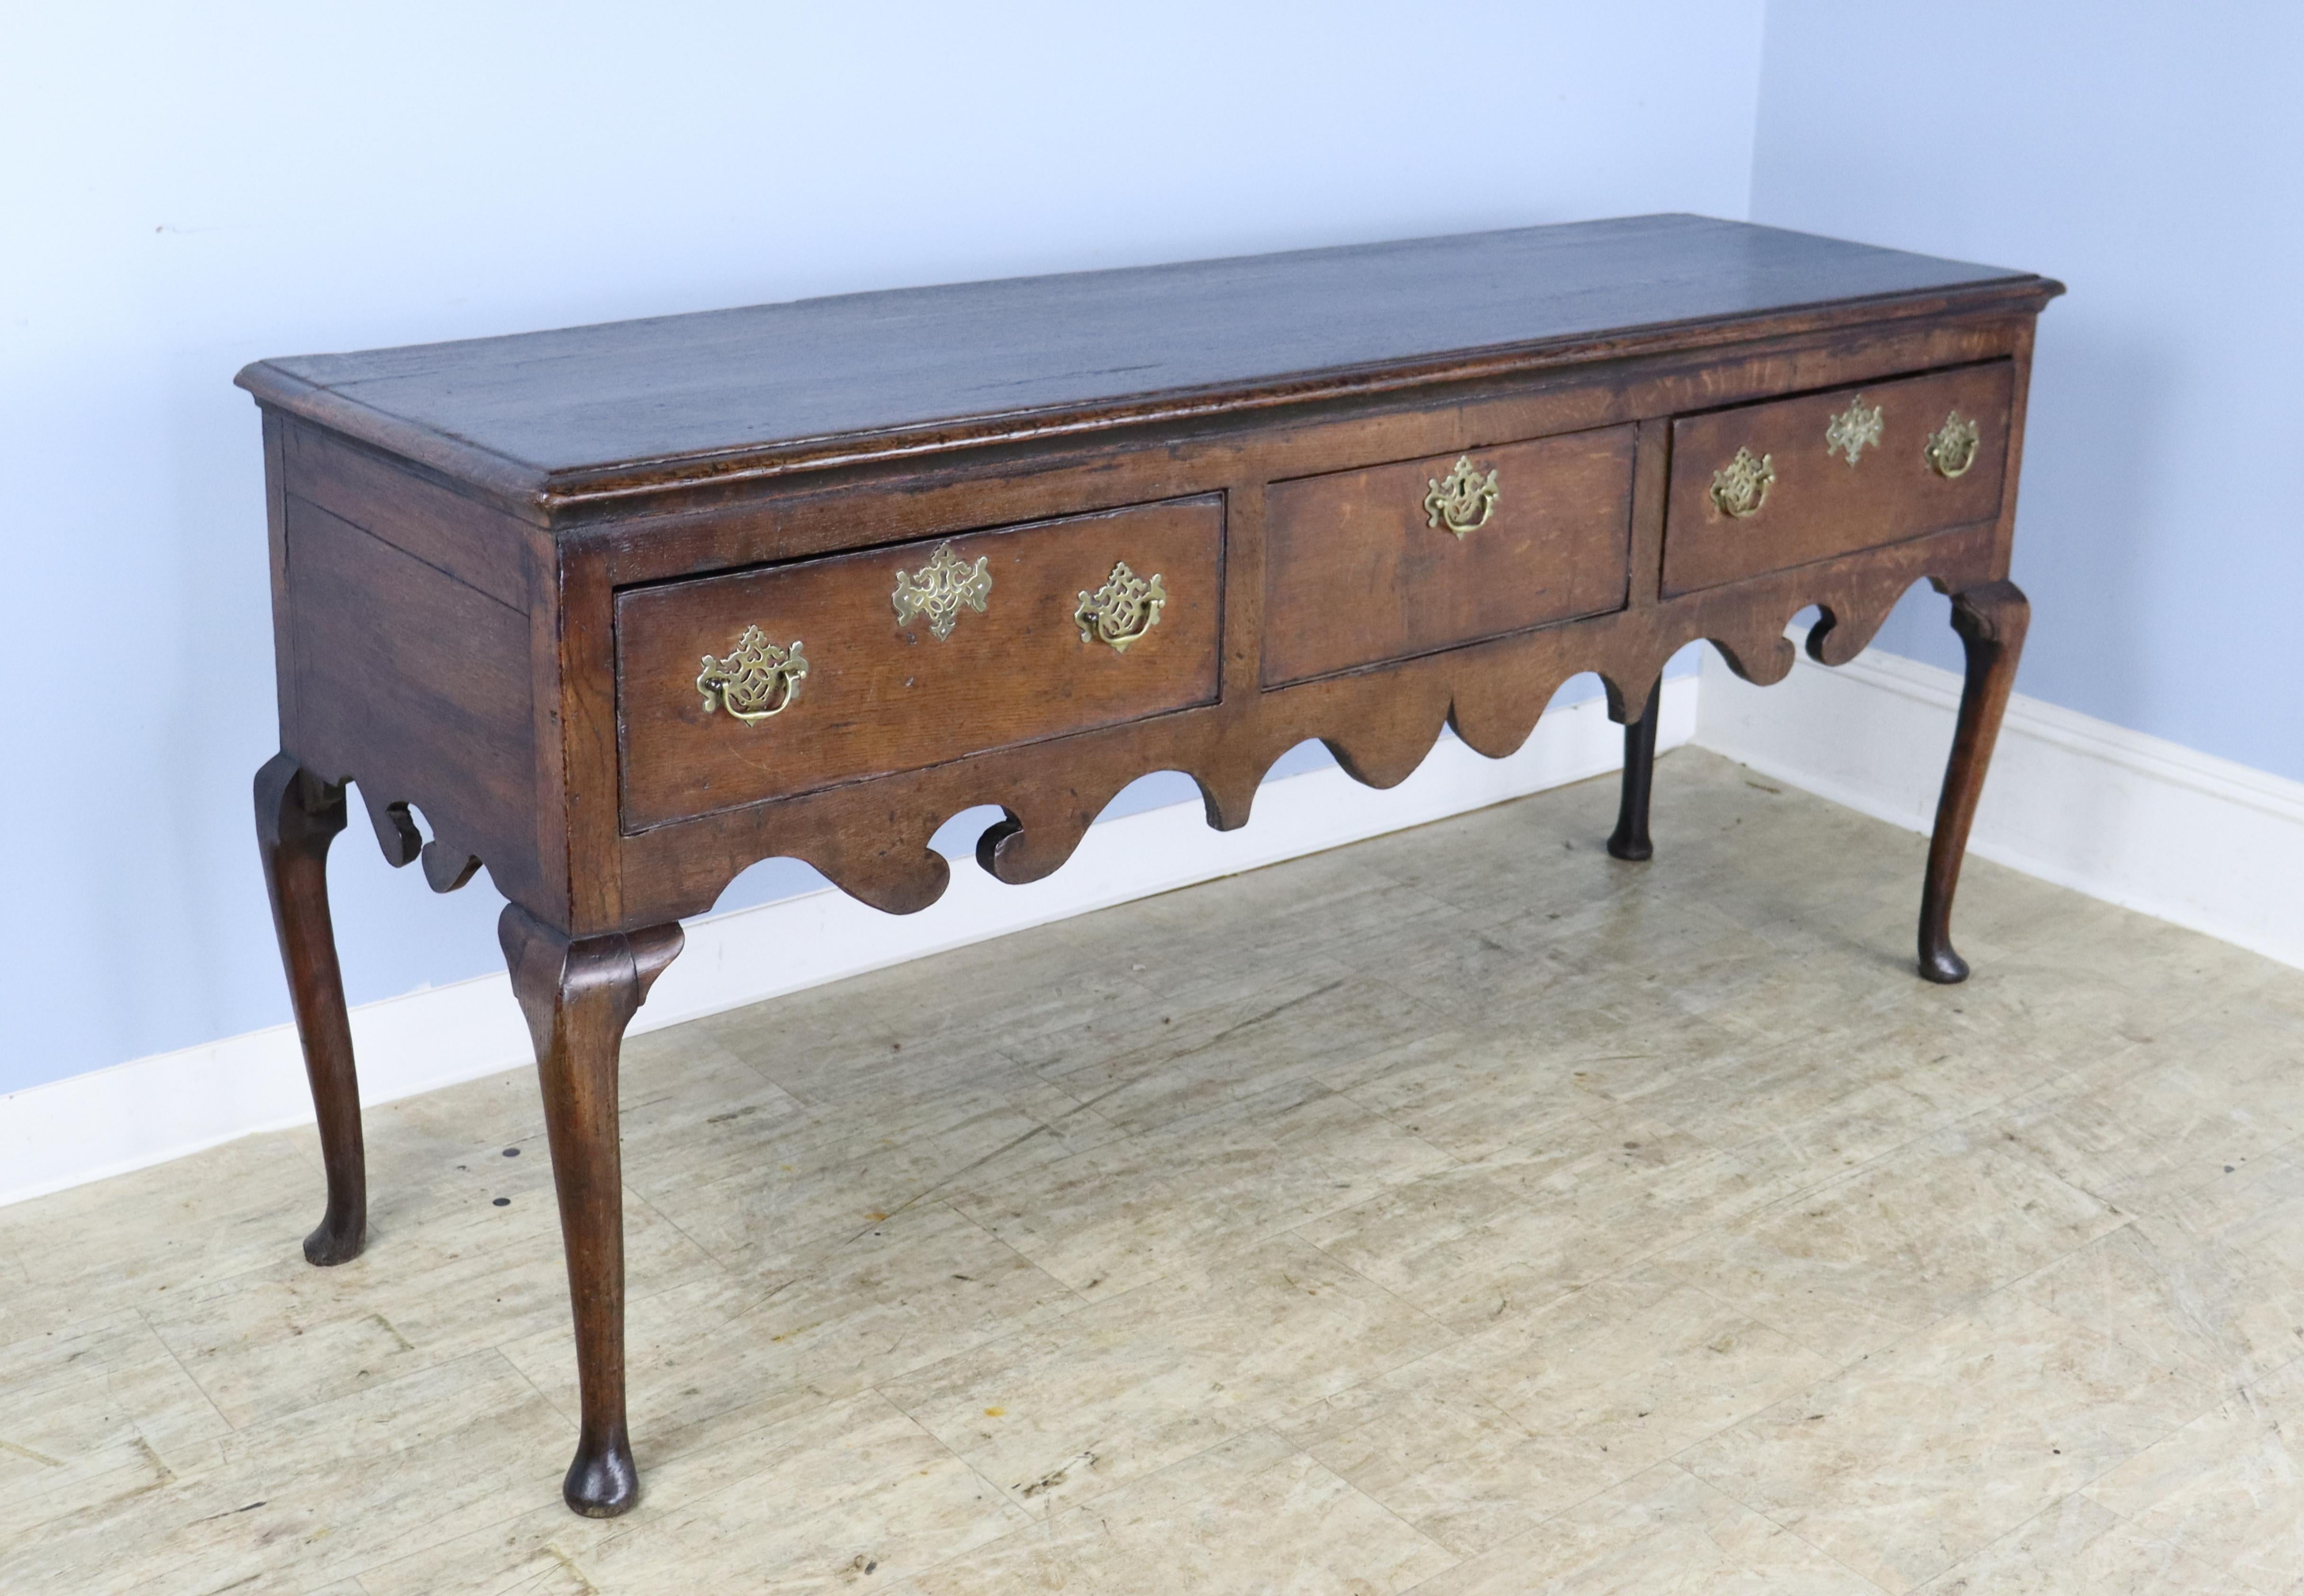 A long formal console table from the early 1700's.  This piece boasts lots of period detail, including gracious pad feet, a whimsical scalloped apron, curved cabriole legs and original fretted brass escutcheons.  The oak has good color and patina. 